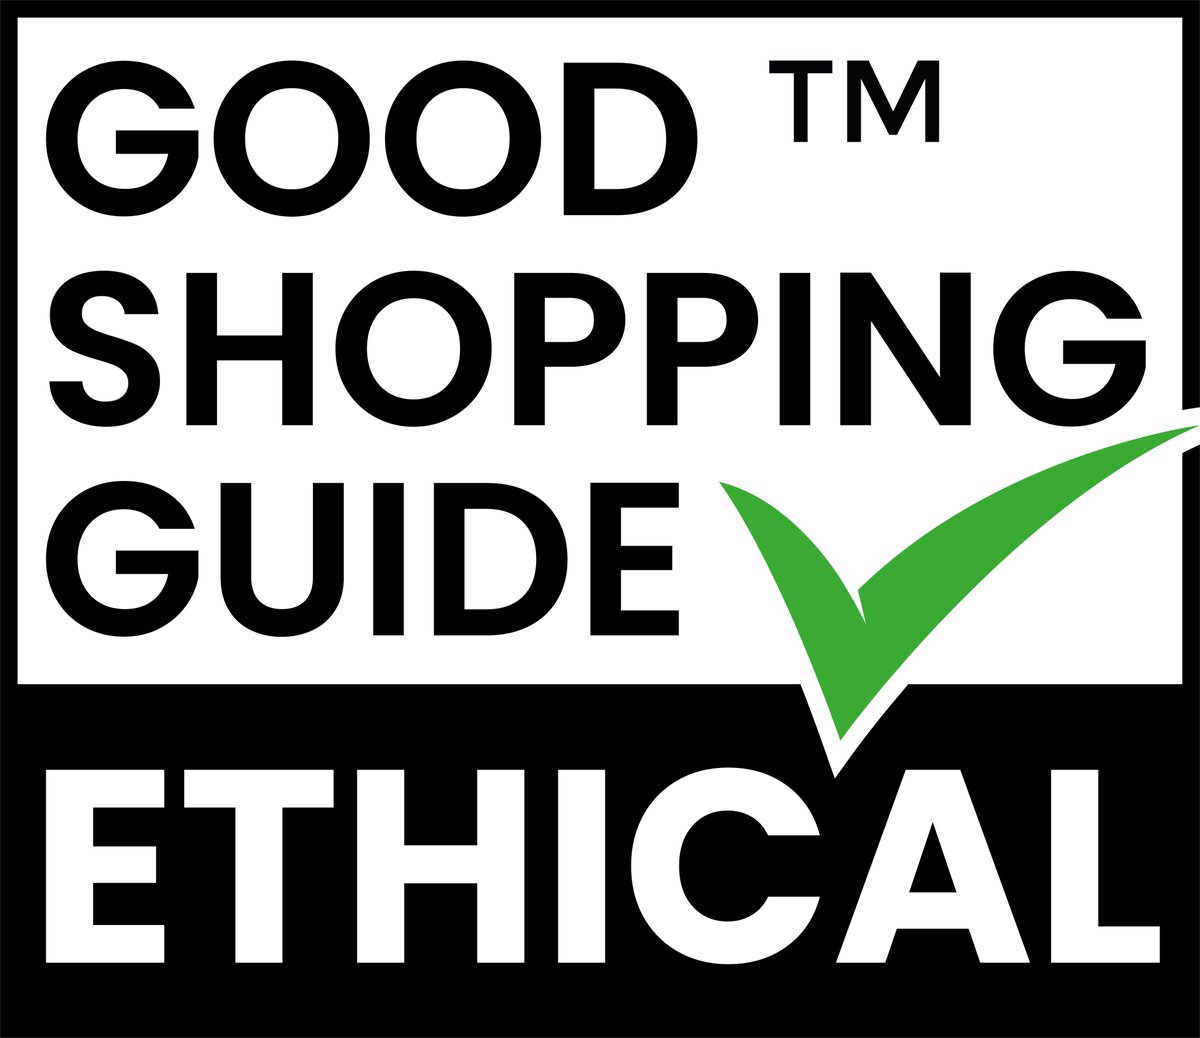 Hey folks, excited to announce that we have been awarded an Ethical Accreditation from The Good Shopping Guide. We are 'an ethical brand that places respect for the Environment, Animals, and People at the core of its business'. #EthicalBusiness
#ConsciousConsumerism #EcoConscious